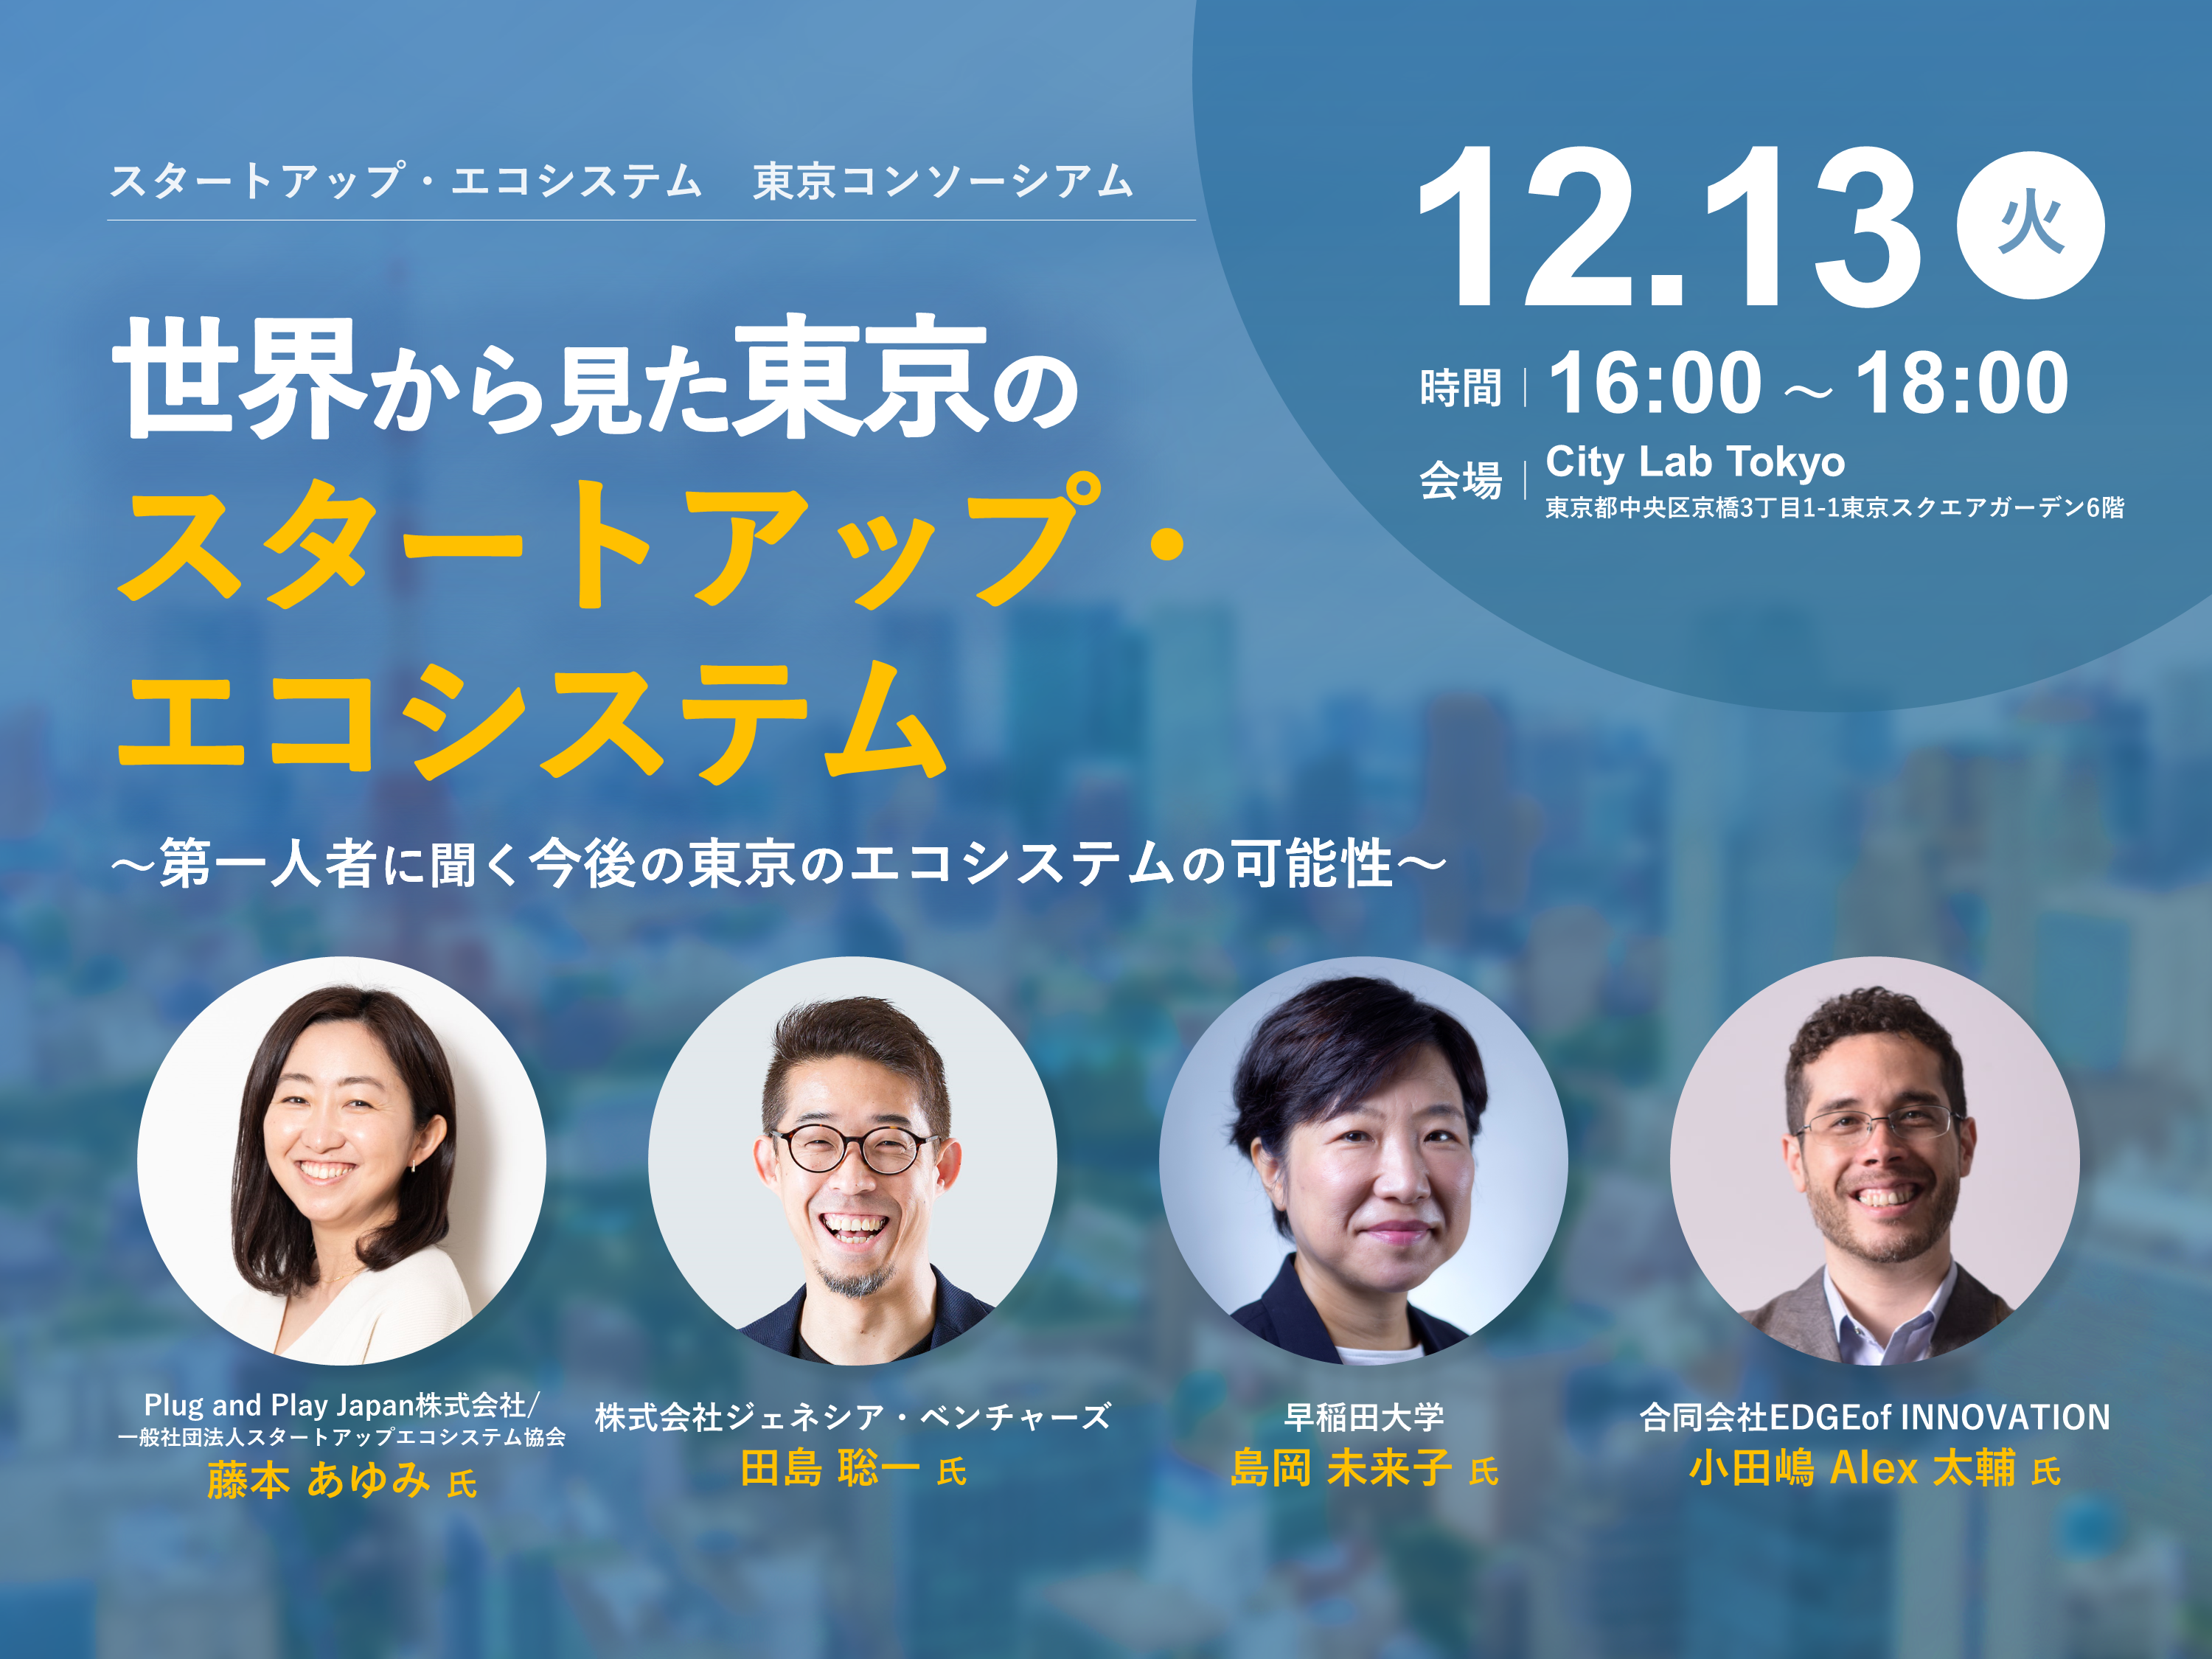 Tokyo's startup ecosystem as seen from the world - Possibilities of Tokyo's ecosystem in the future - Interview with a leading expert